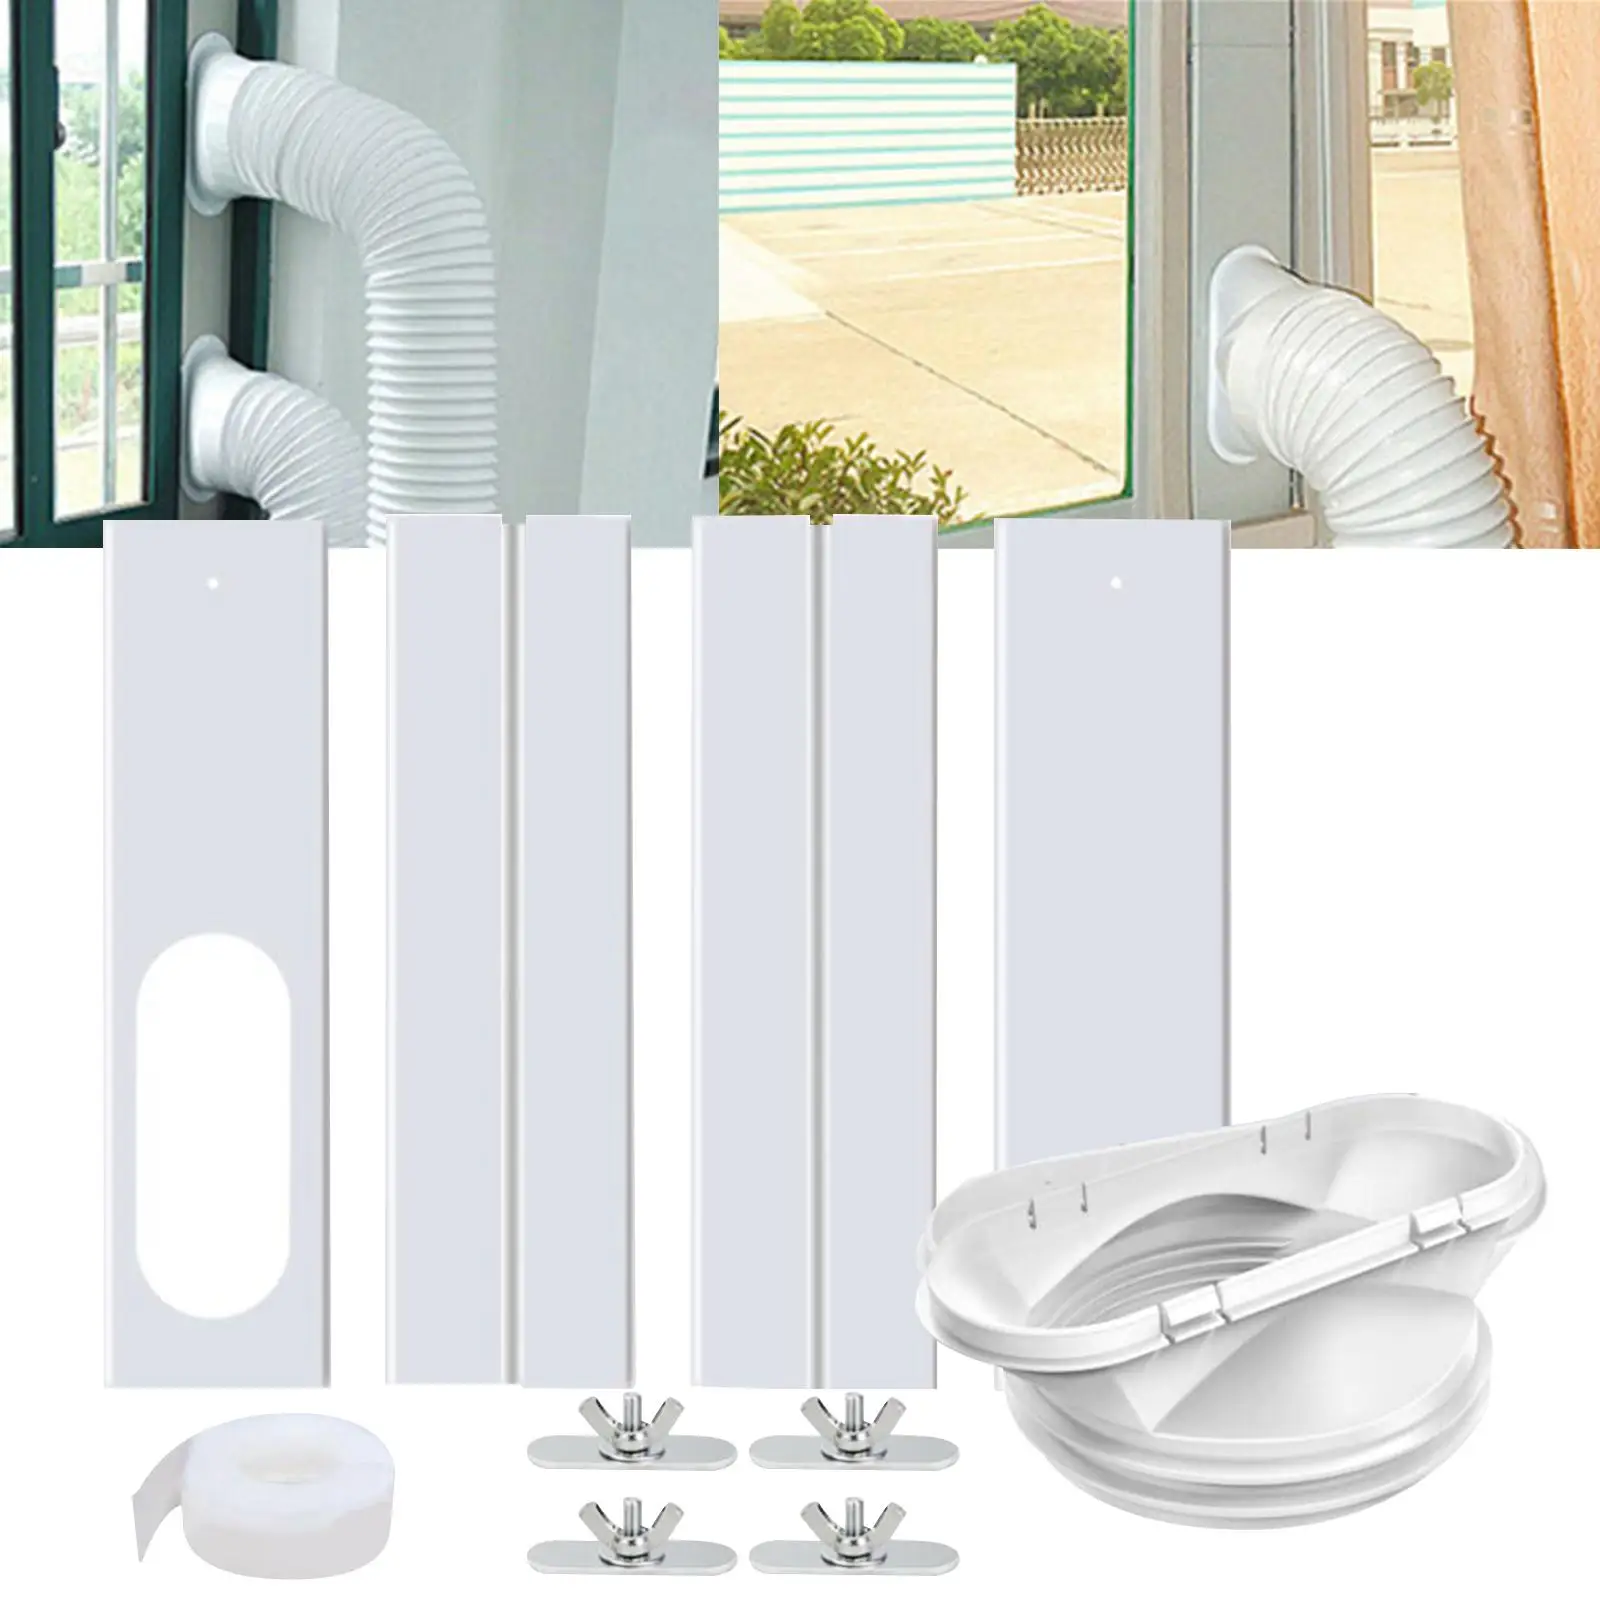 Portable Air Conditioner Window Kit Good Toughness PVC for Sliding Window